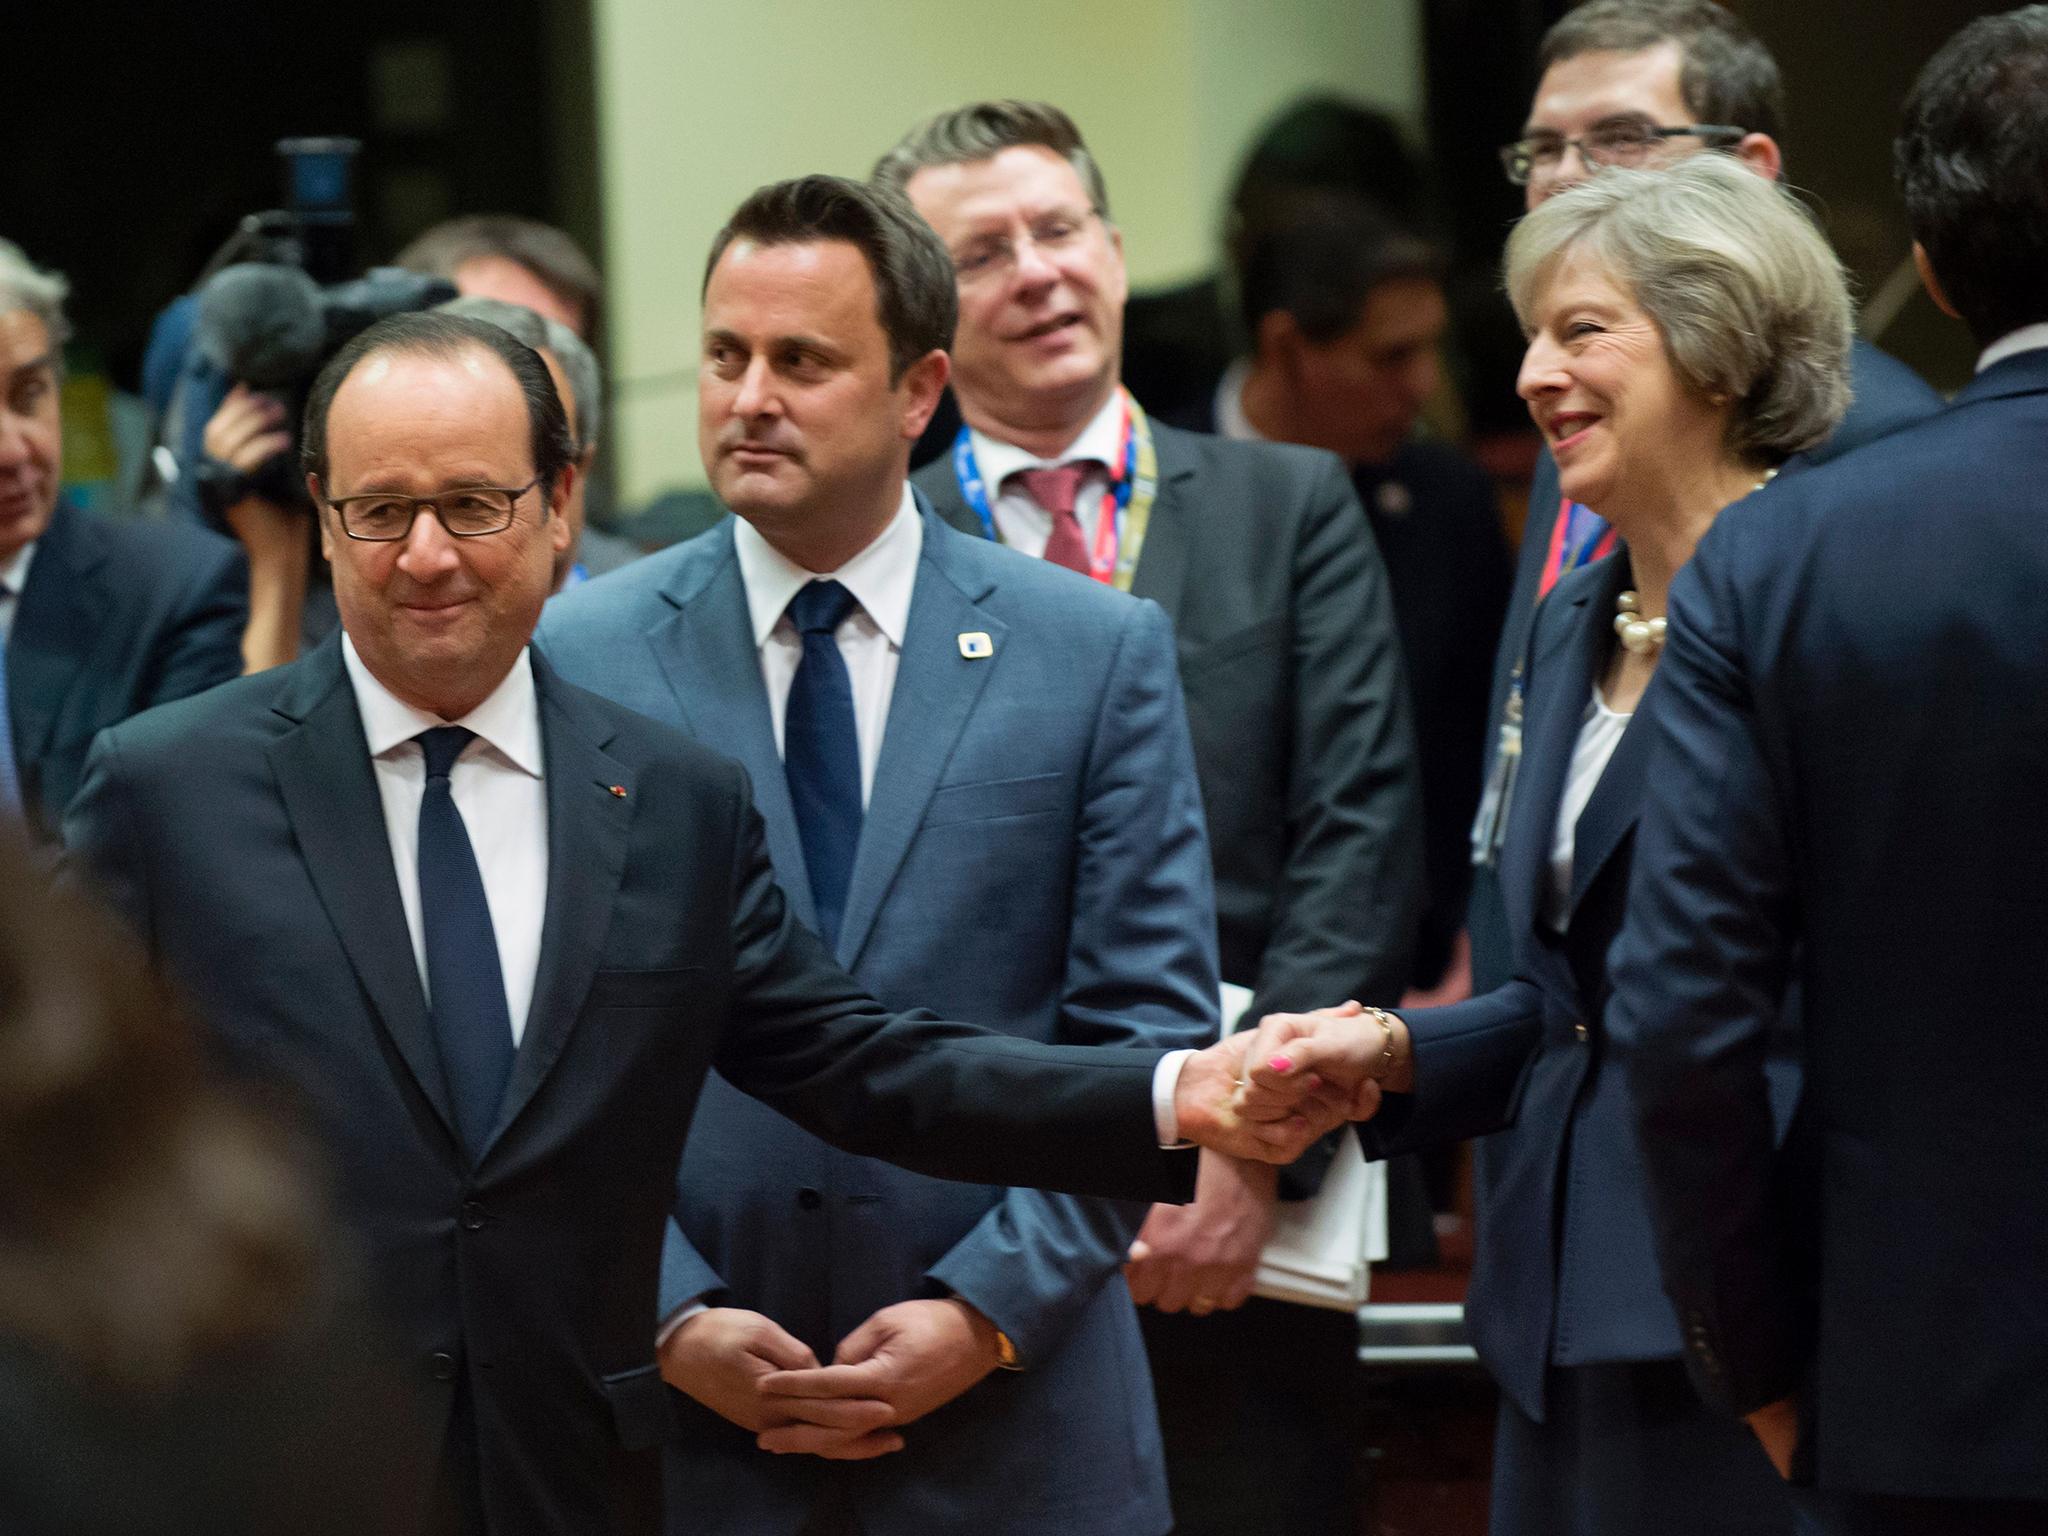 Theresa May mingles with other EU leaders at the summit in Brussels